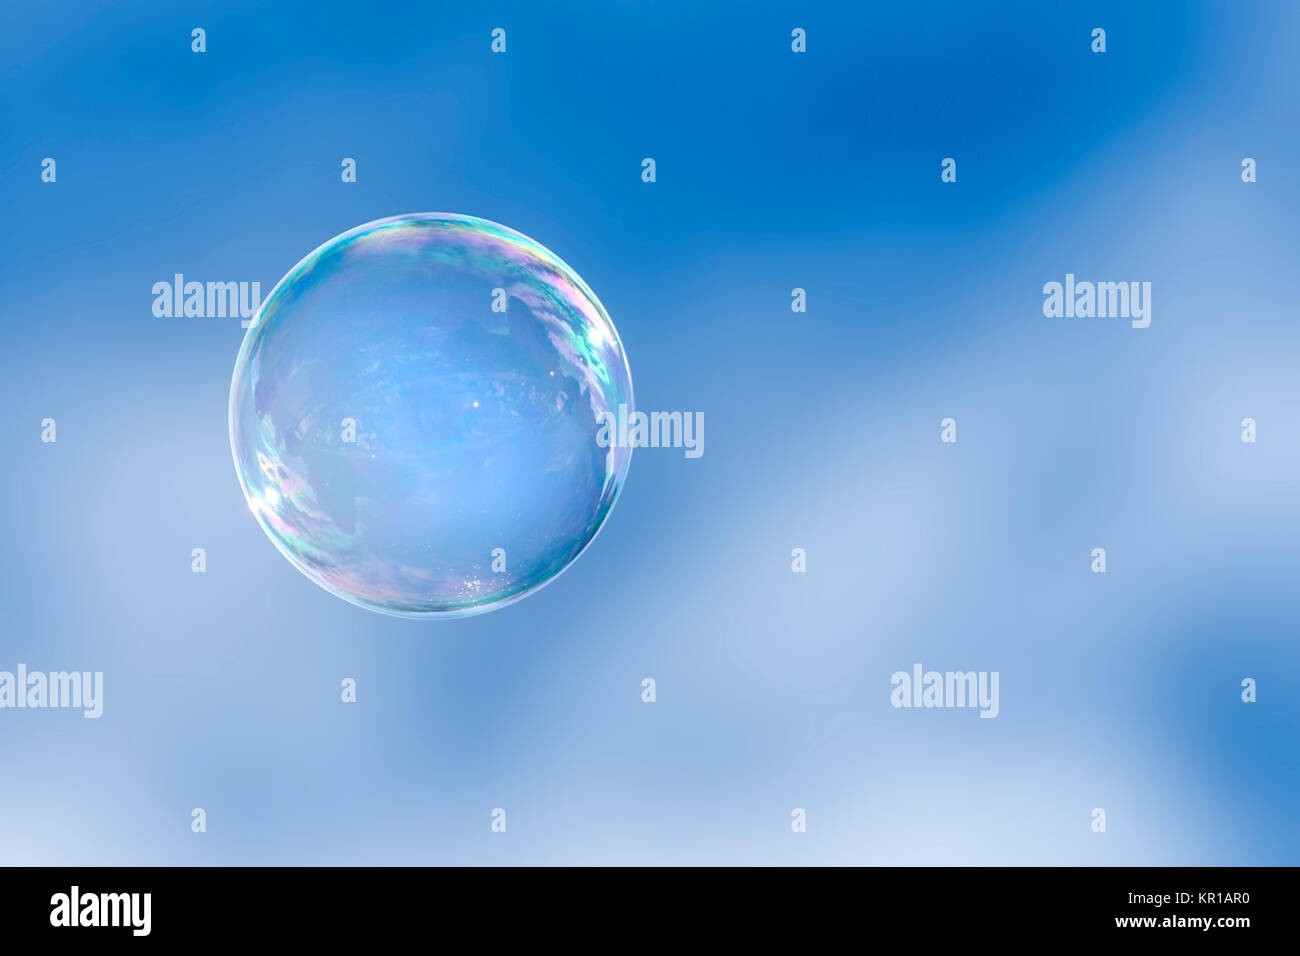 Soap bubble floating in a blue sky Stock Photo